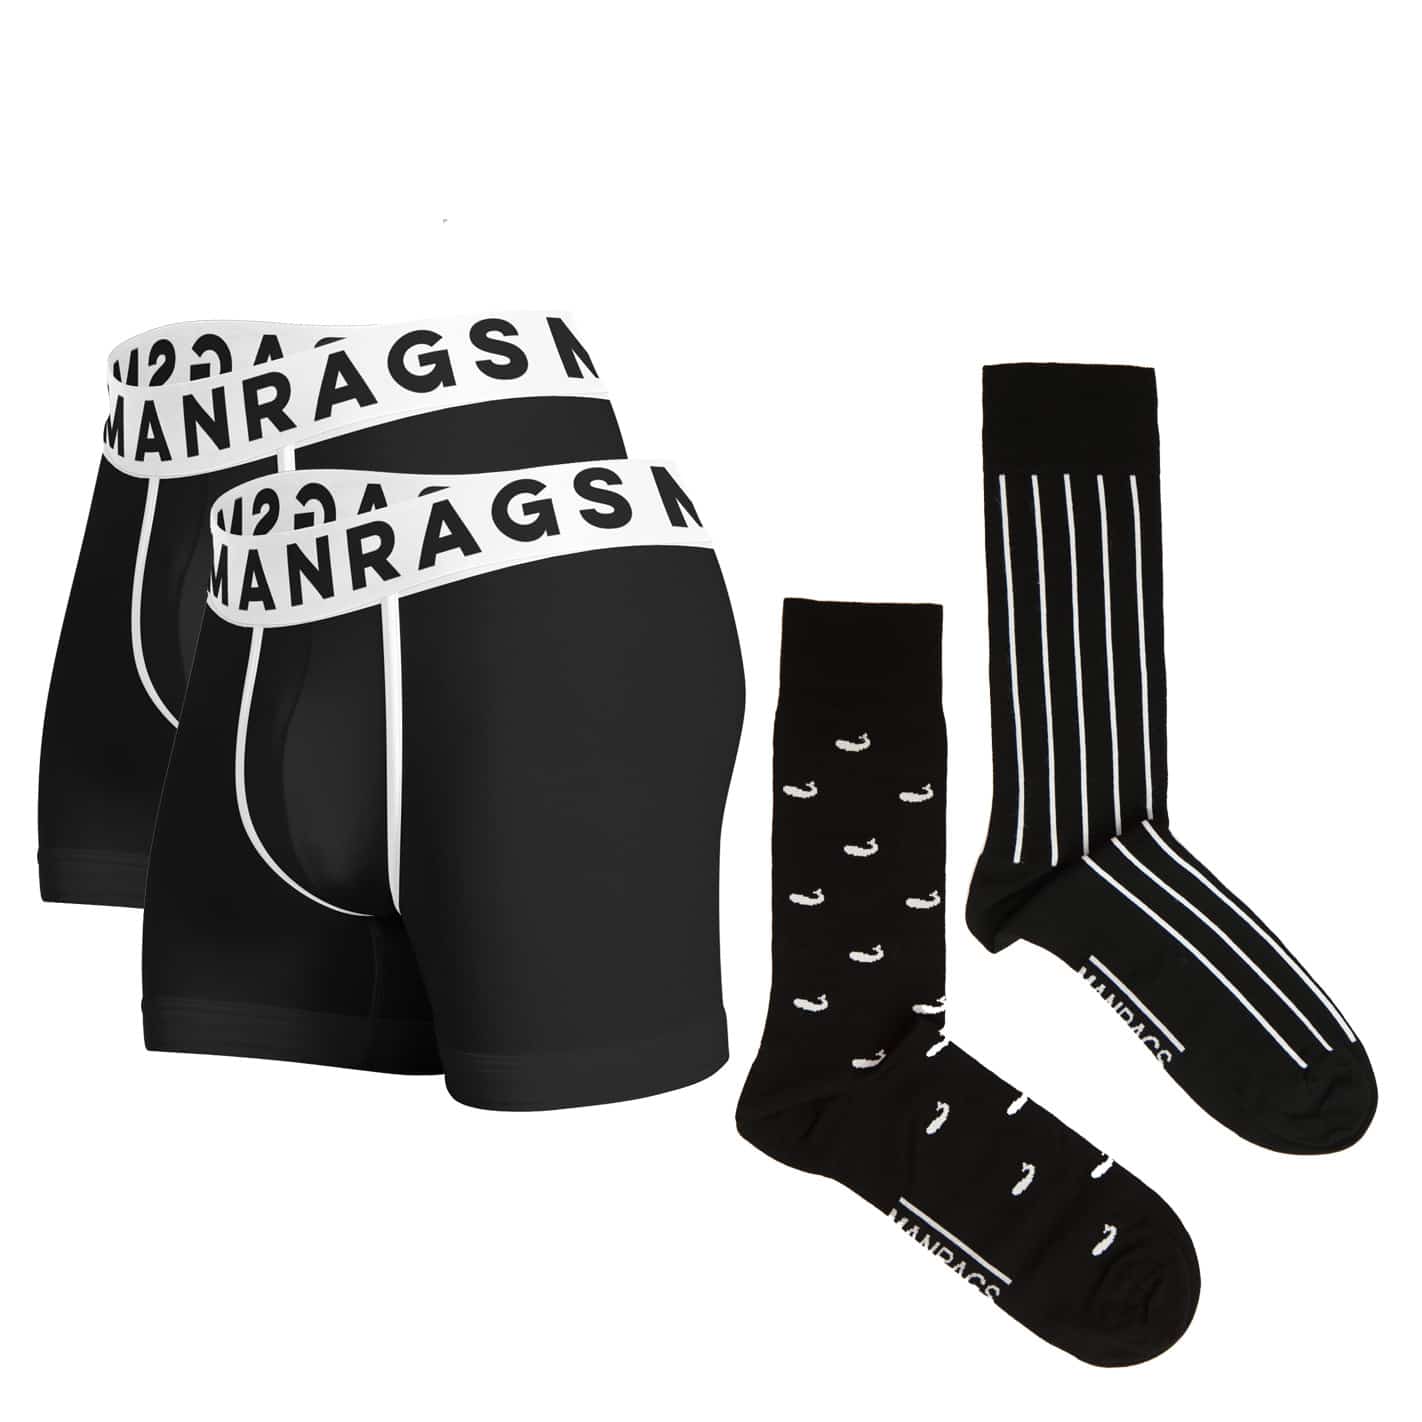 Manrags Essentials Package